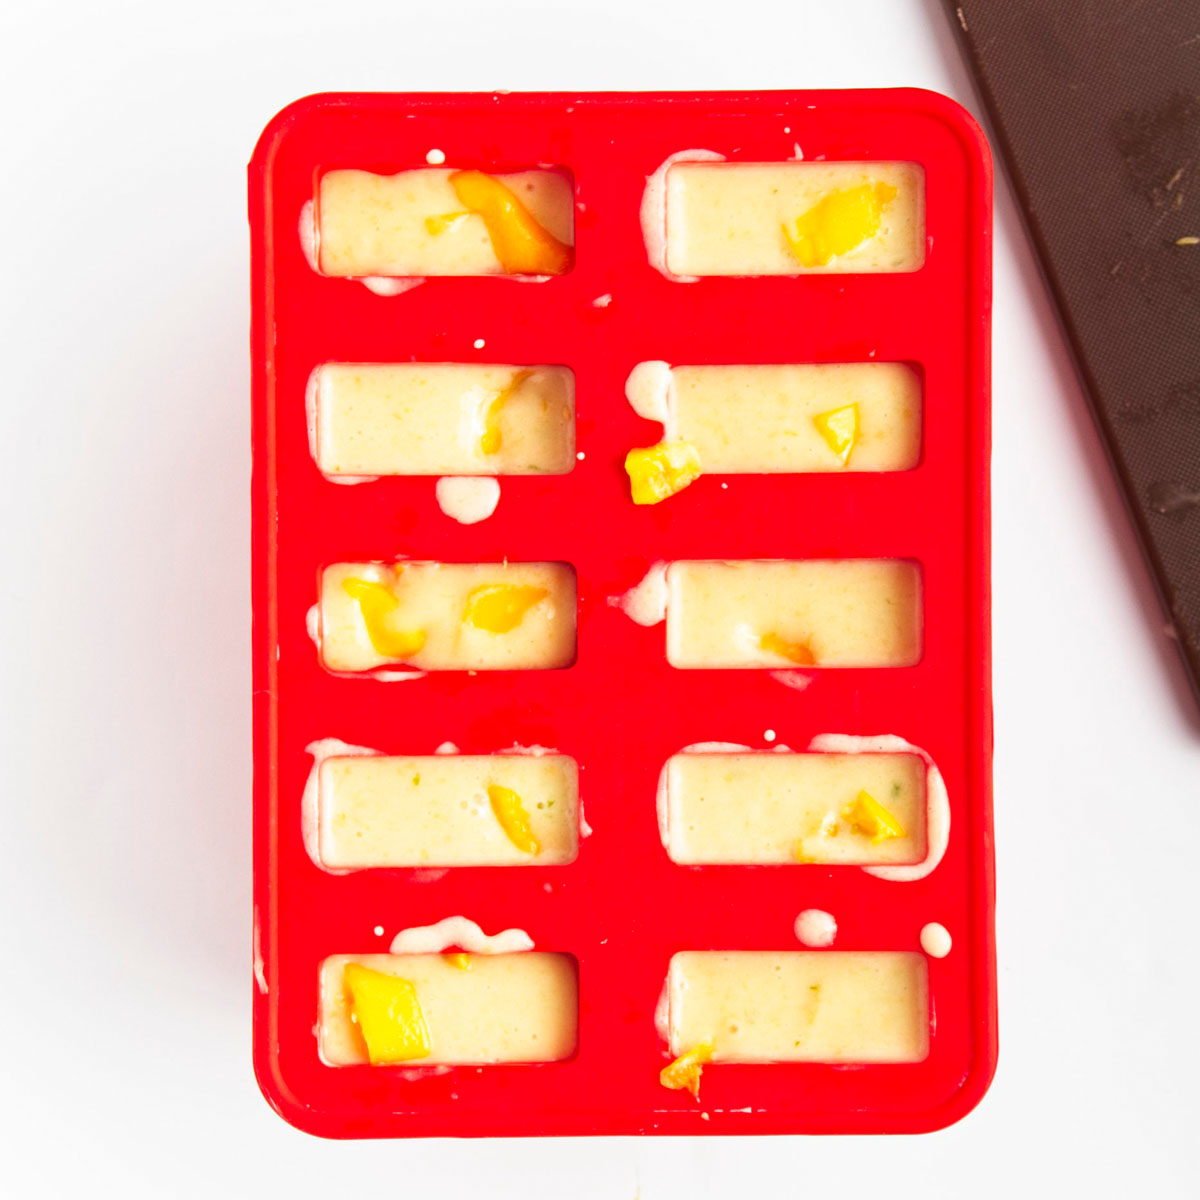 Red popsicle mold with 10 holes filled to the brim with yellow puree and mango pieces.